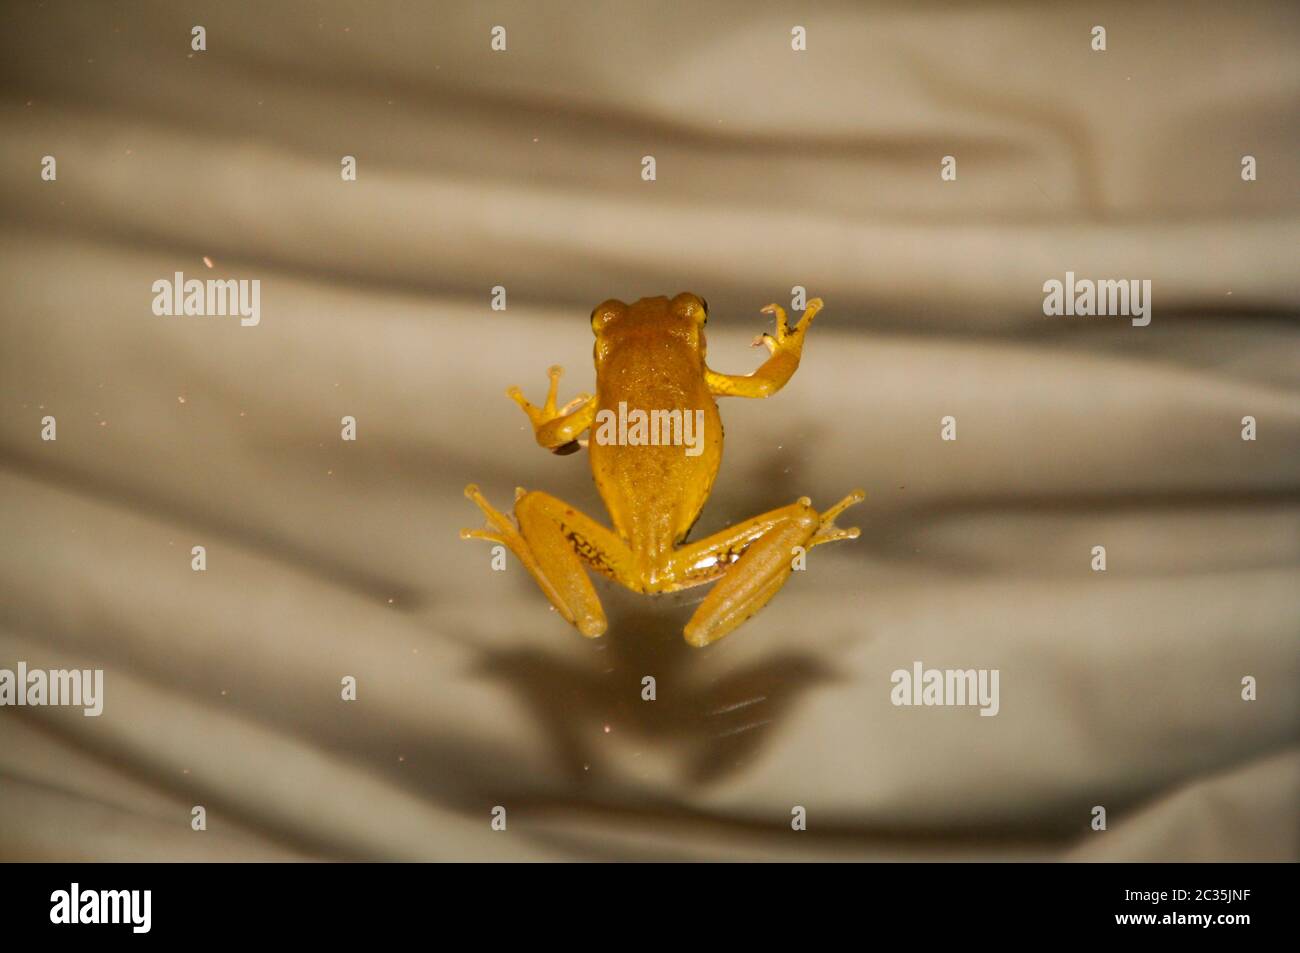 View of a Cuban tree frog on a glass pane Stock Photo